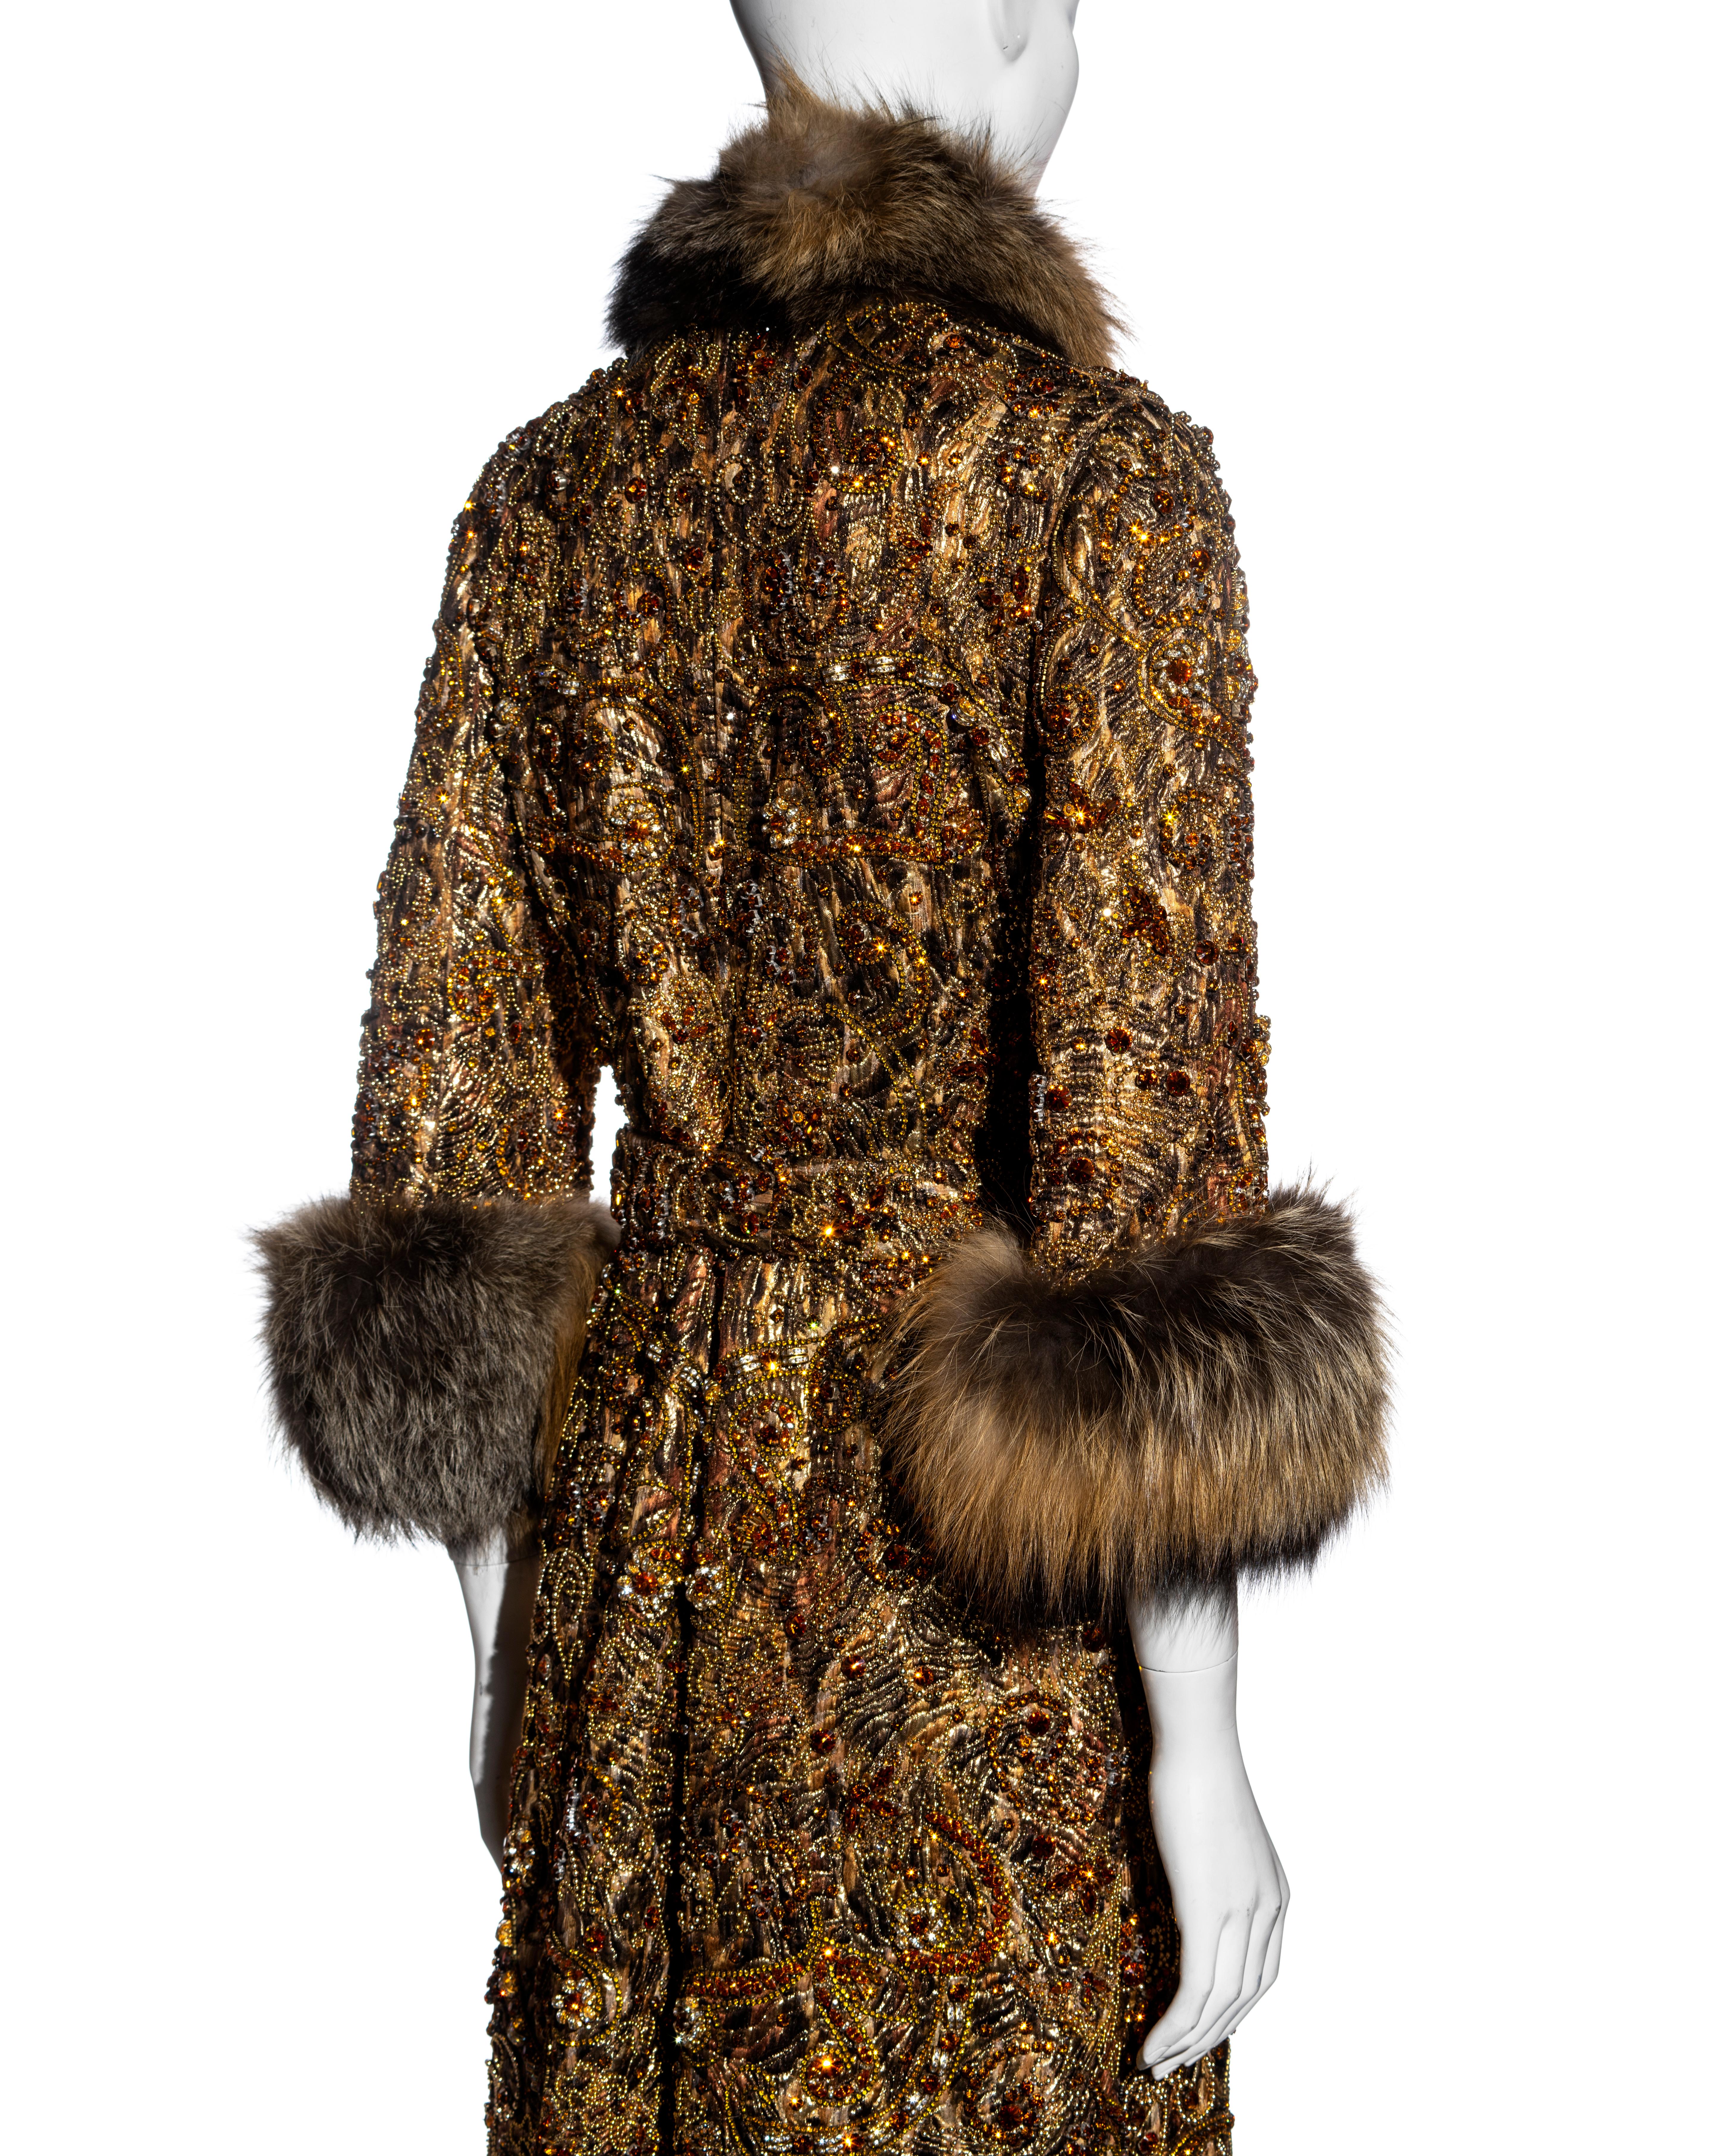 Dolce & Gabbana brocade and fox fur crystal embellished evening coat, fw 2004 For Sale 6